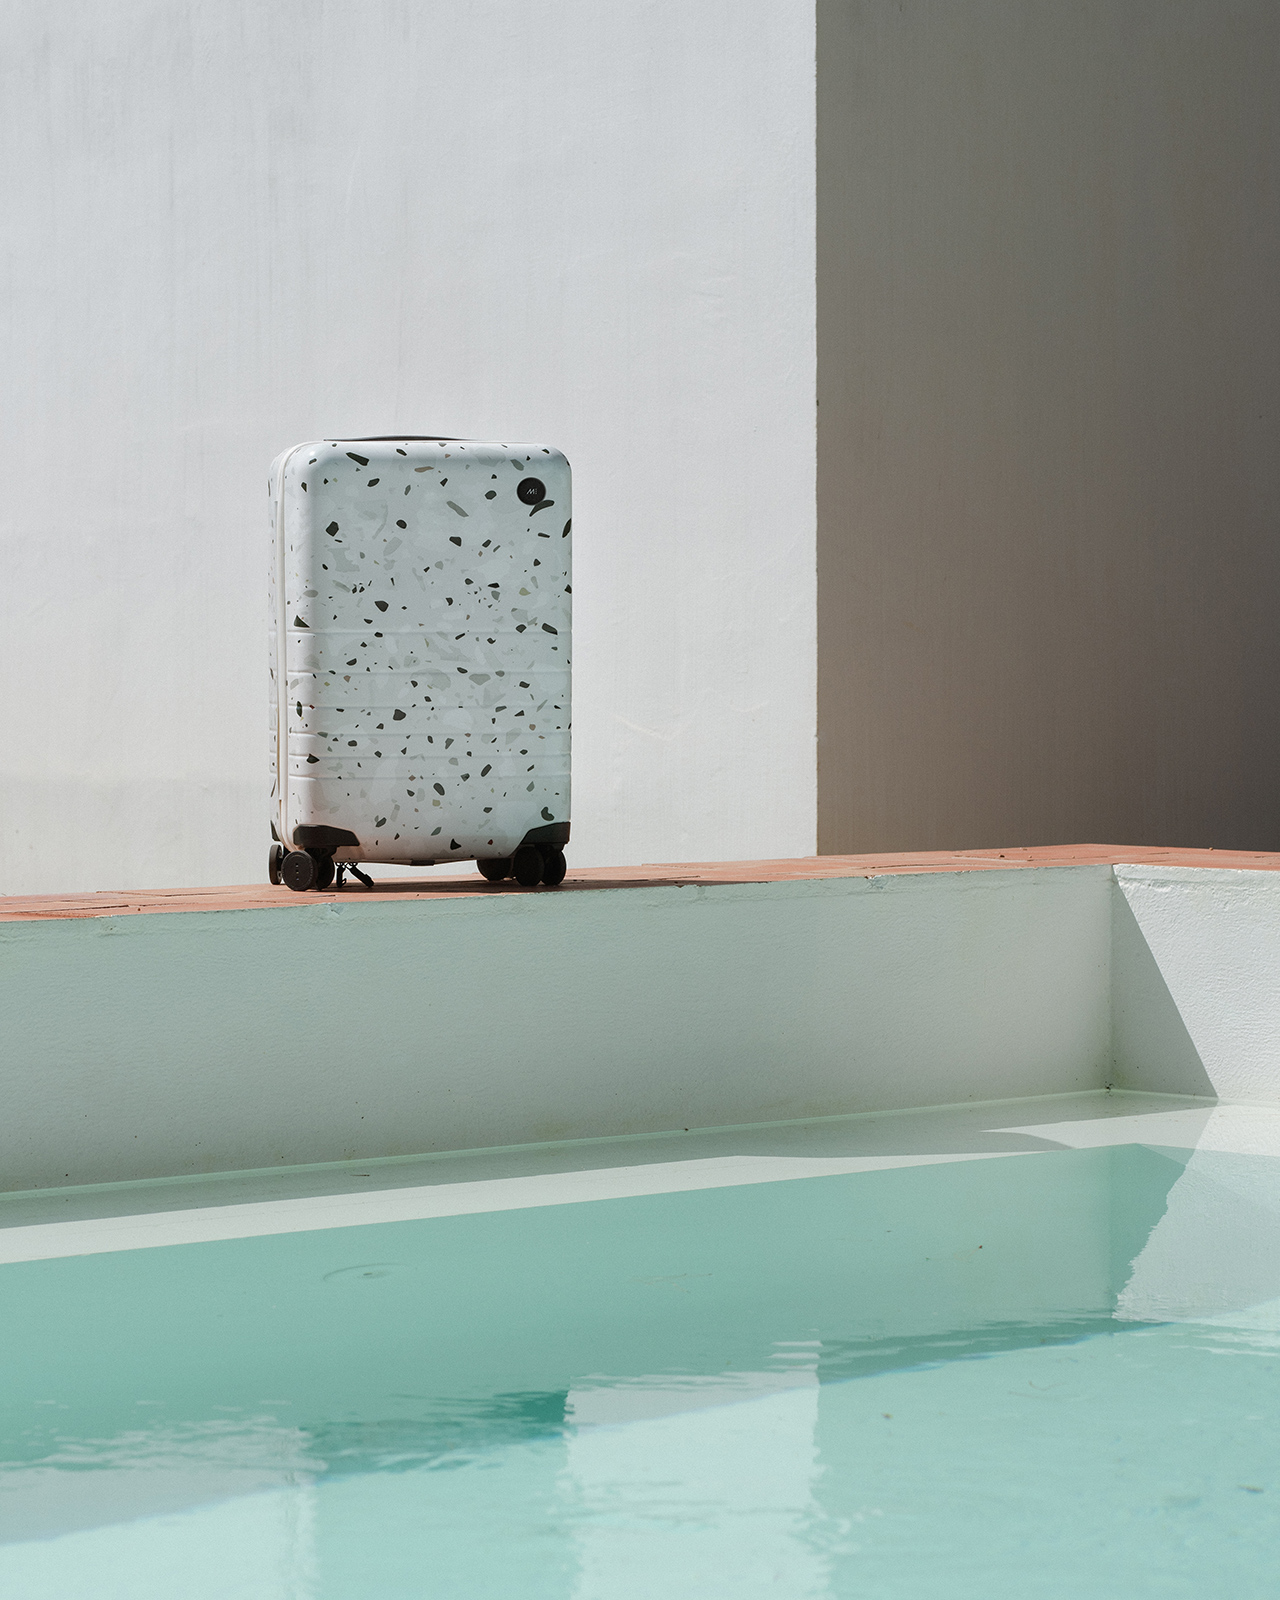 Monos are releasing a new Terrazzo print in their line of premium luggage on November 9th